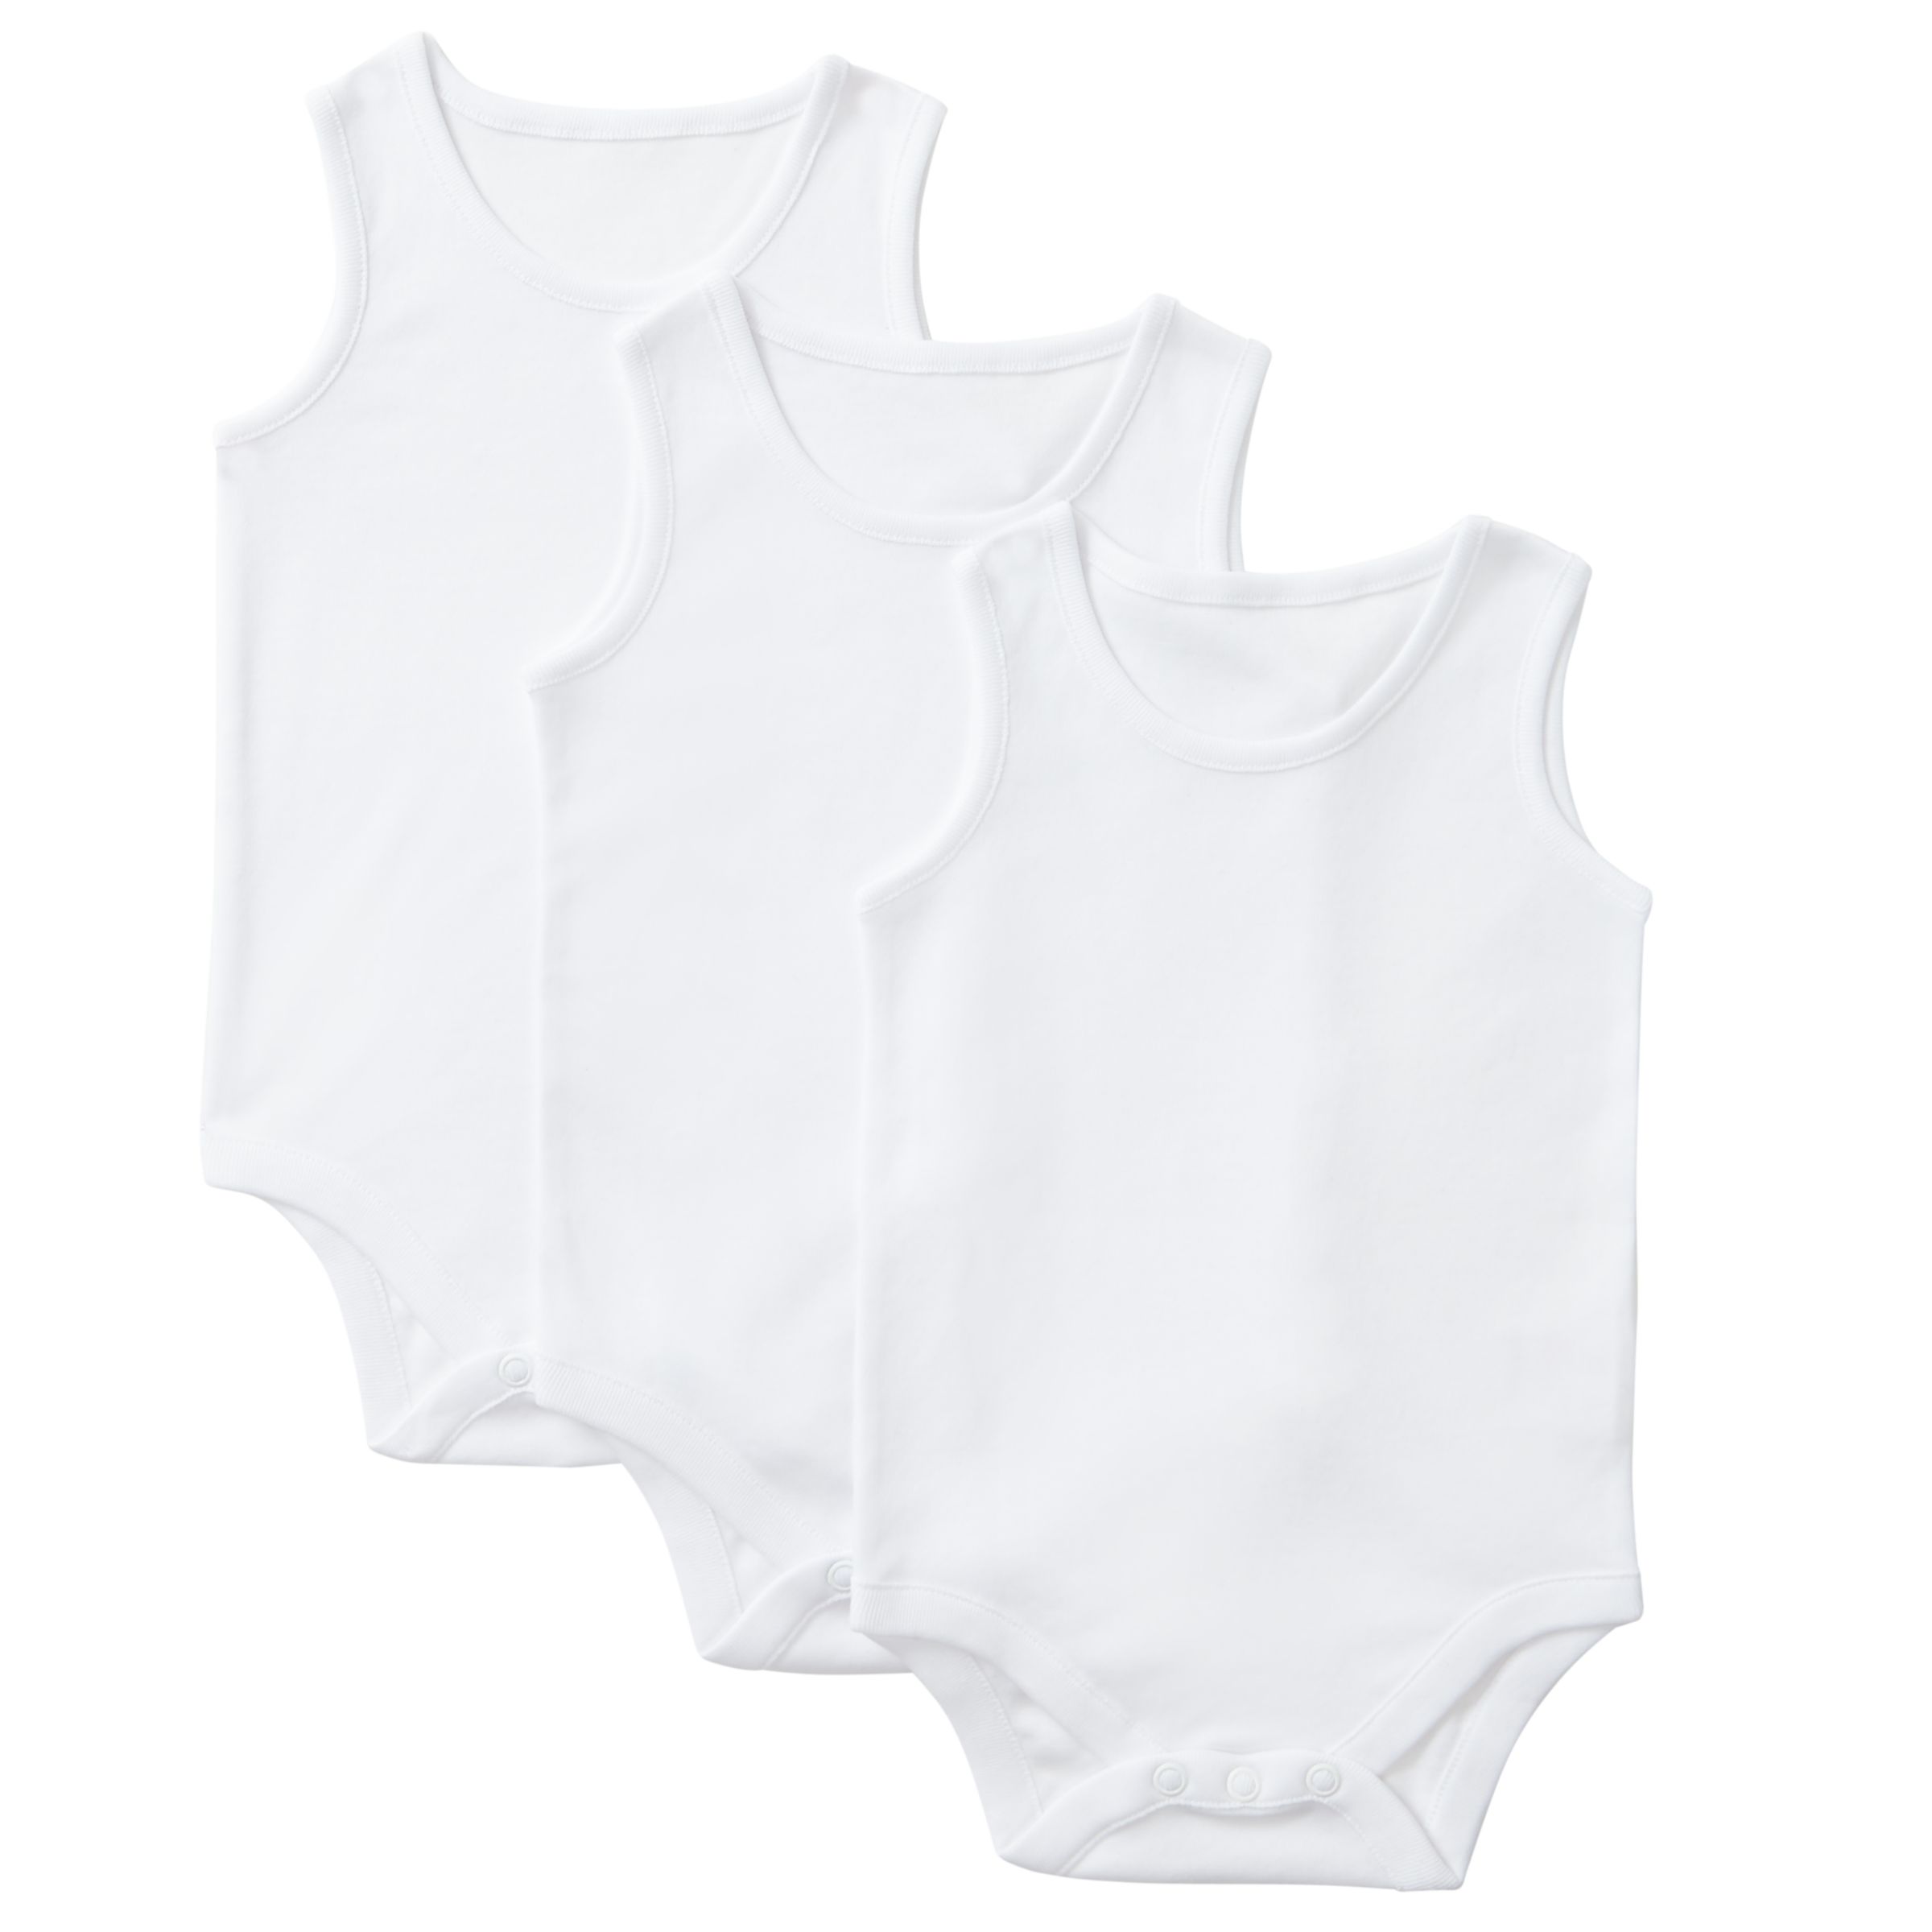 Baby Boys Bodysuits Set Long Sleeve Pack Neutral Vests Age 0 3 6 9 12 Months NEW 